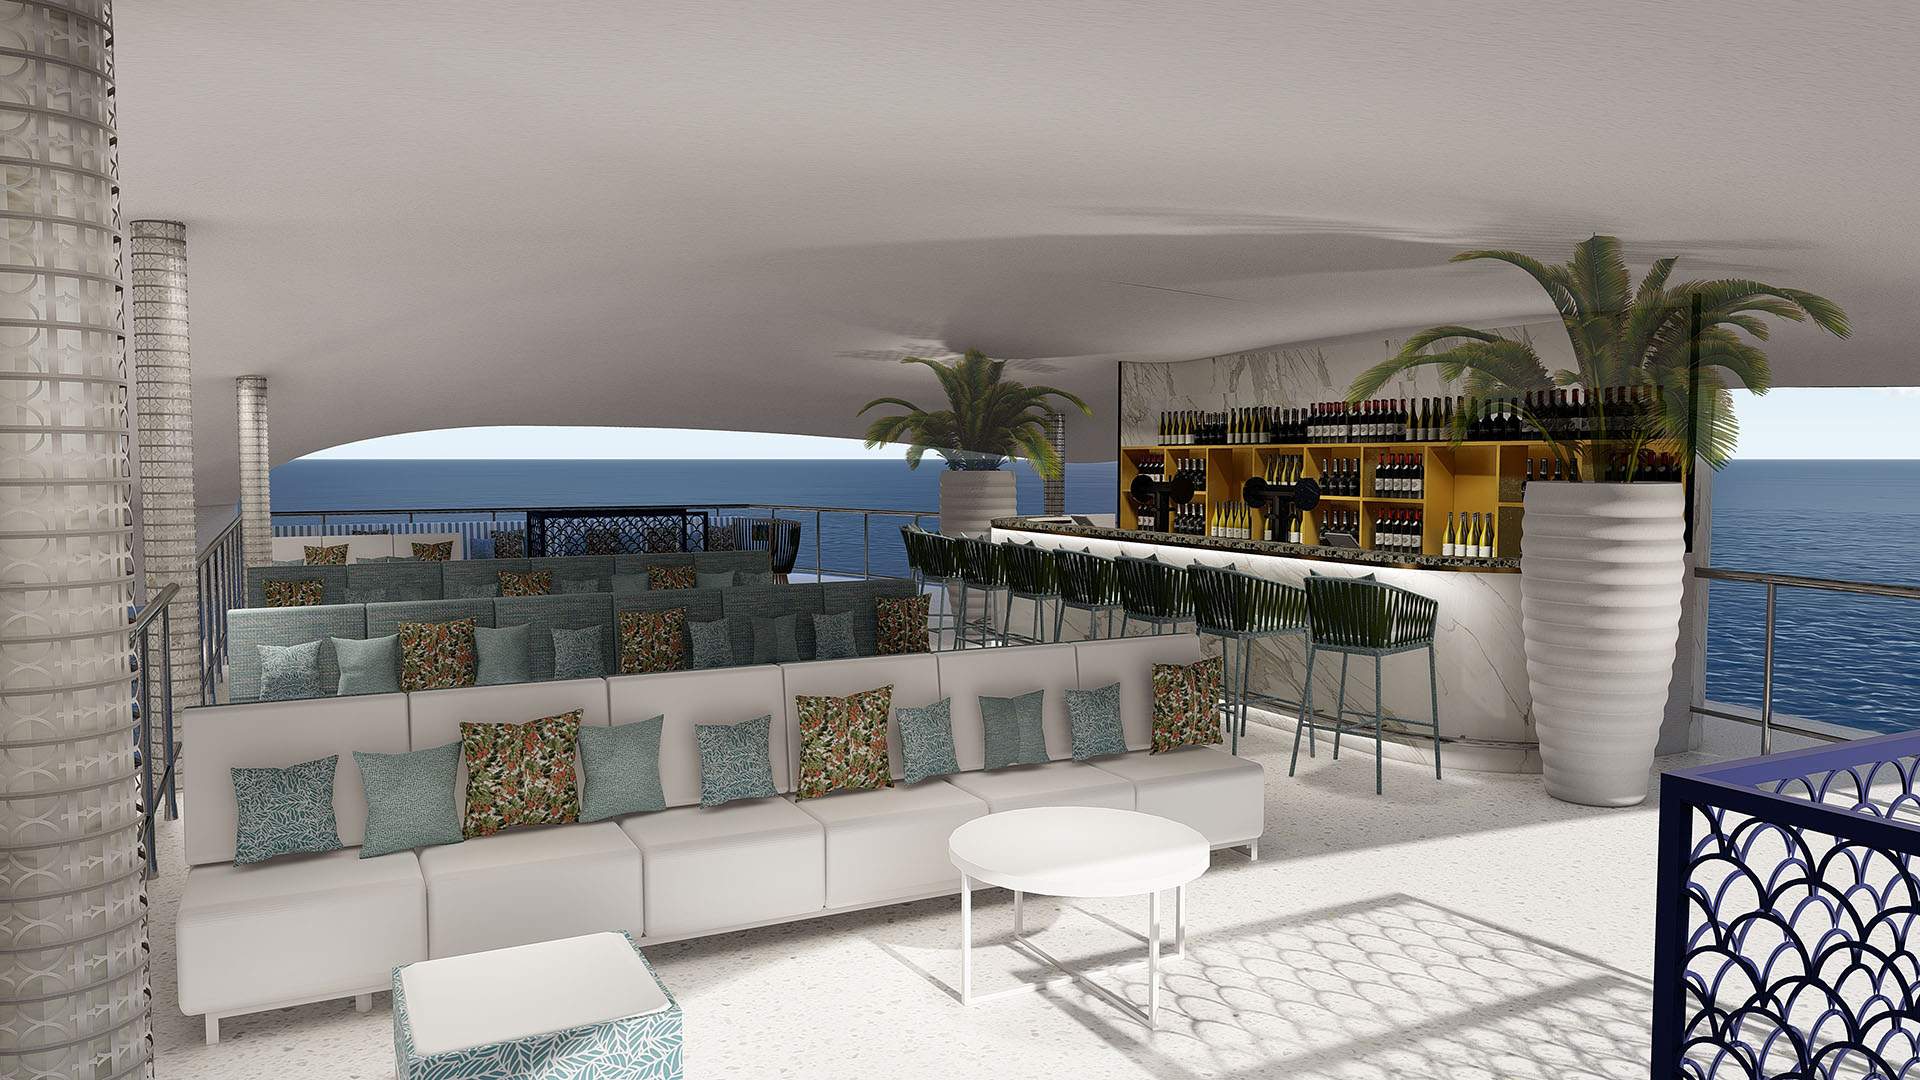 Yot Club Is Brisbane's Huge New Party Venue on a 400-Person Yacht